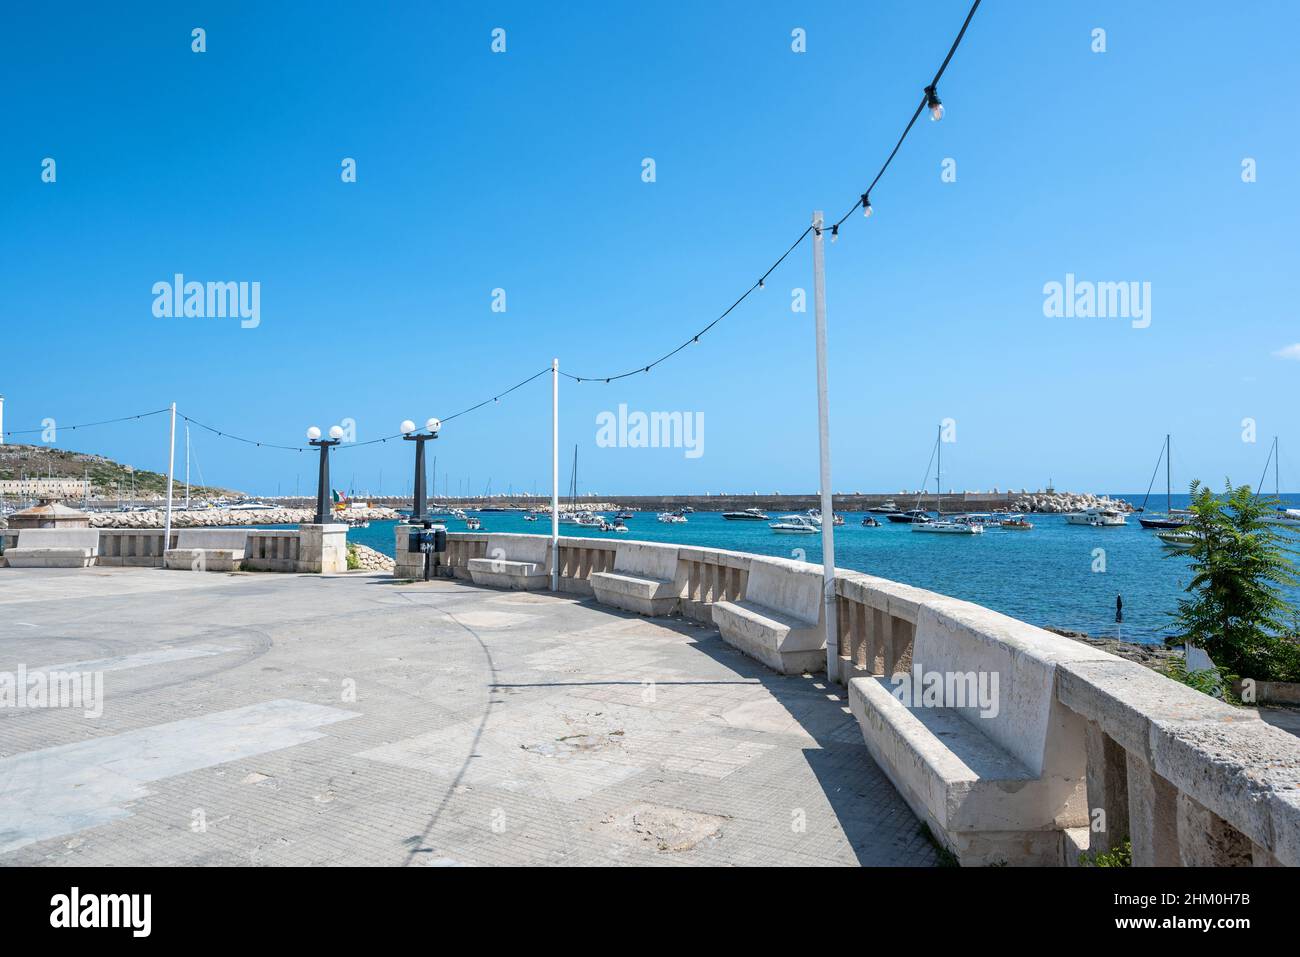 Santa Maria di Leuca, Santa Maria di Leuca, Puglia, Italy. August2021. View of the harbor from the promenade along the sea, beautiful summer day. Stock Photo